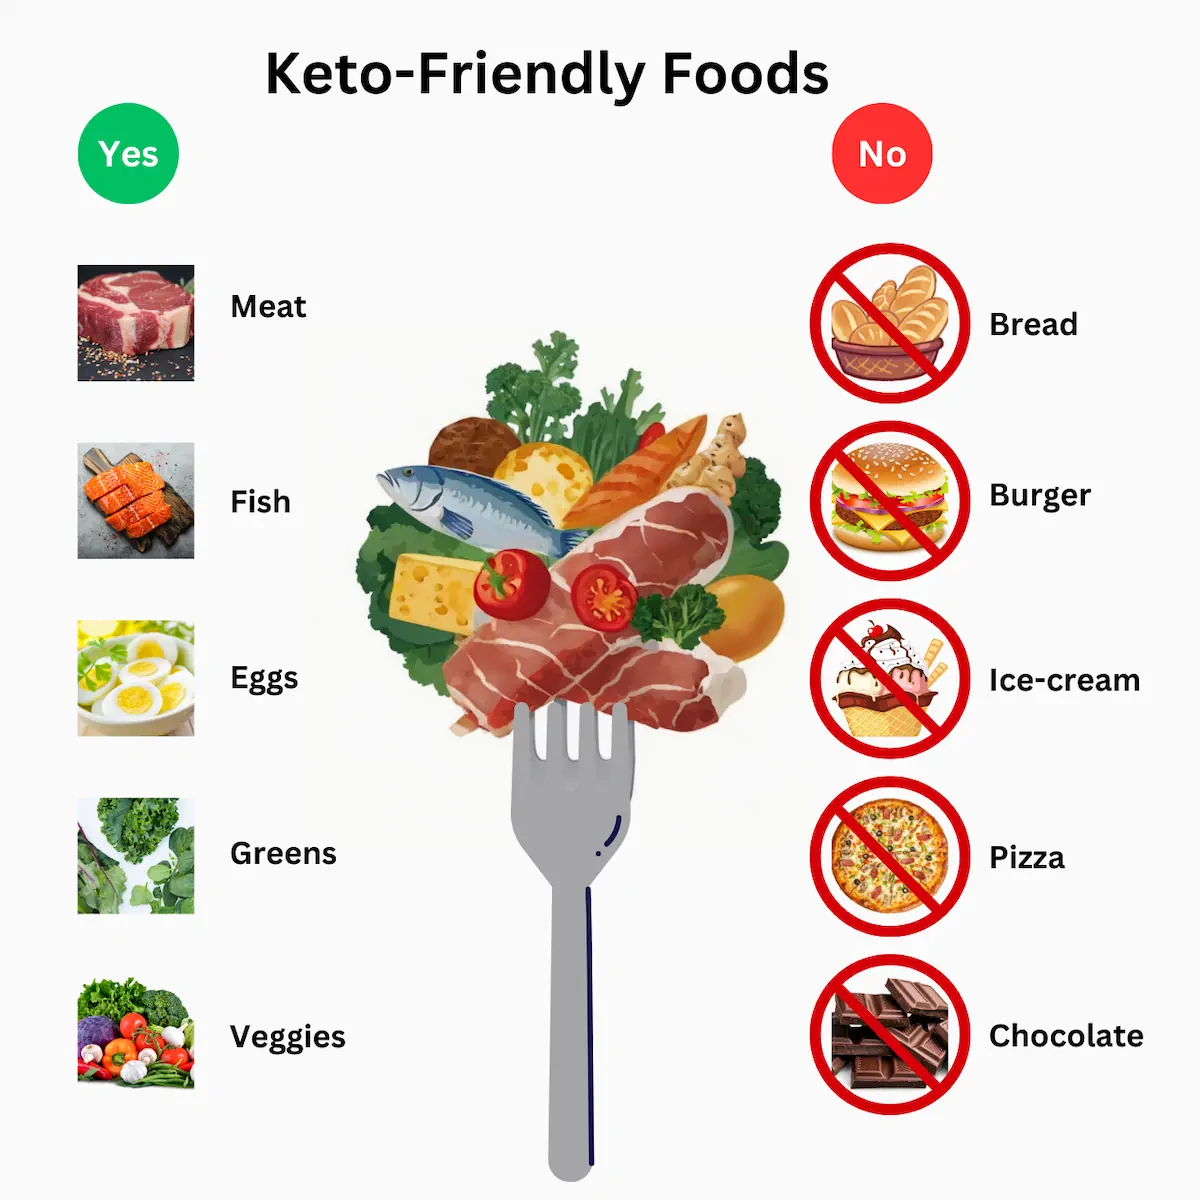 Keto Fast Food: Your Ultimate Guide to Eating Low-Carb on the Go